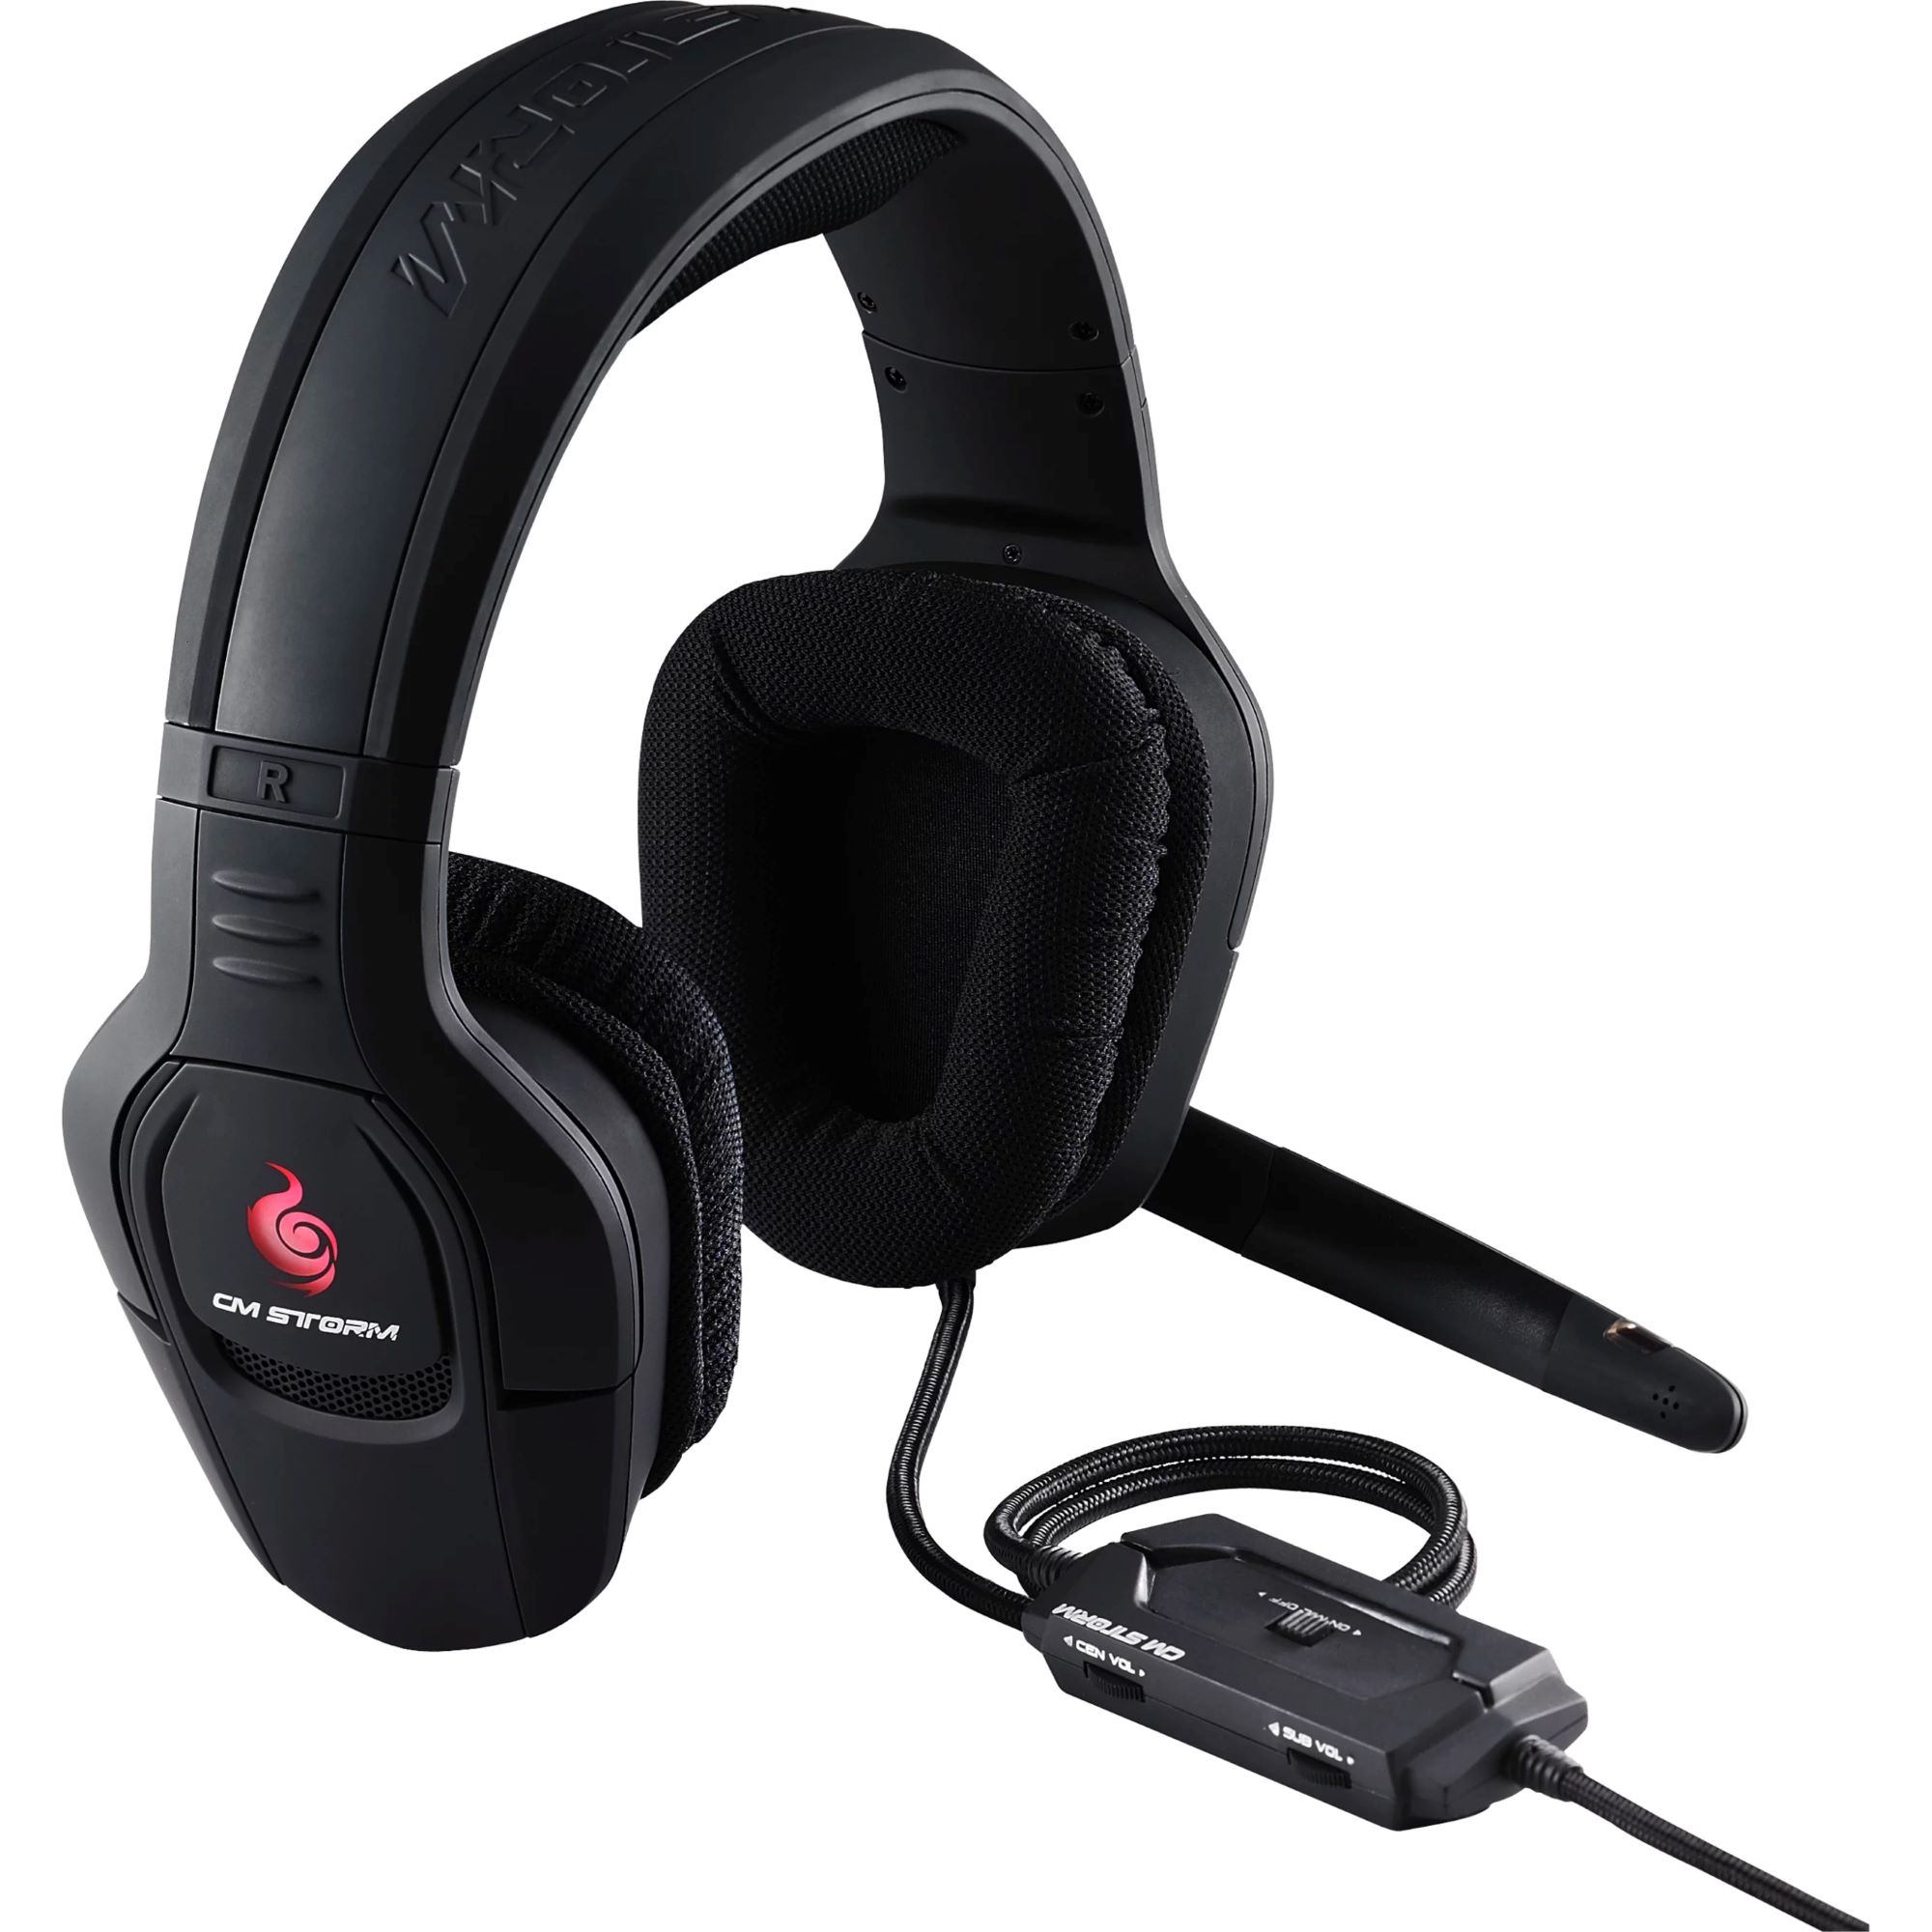 How Do I Hook Up My CM Storm 5.1 Gaming Headset?